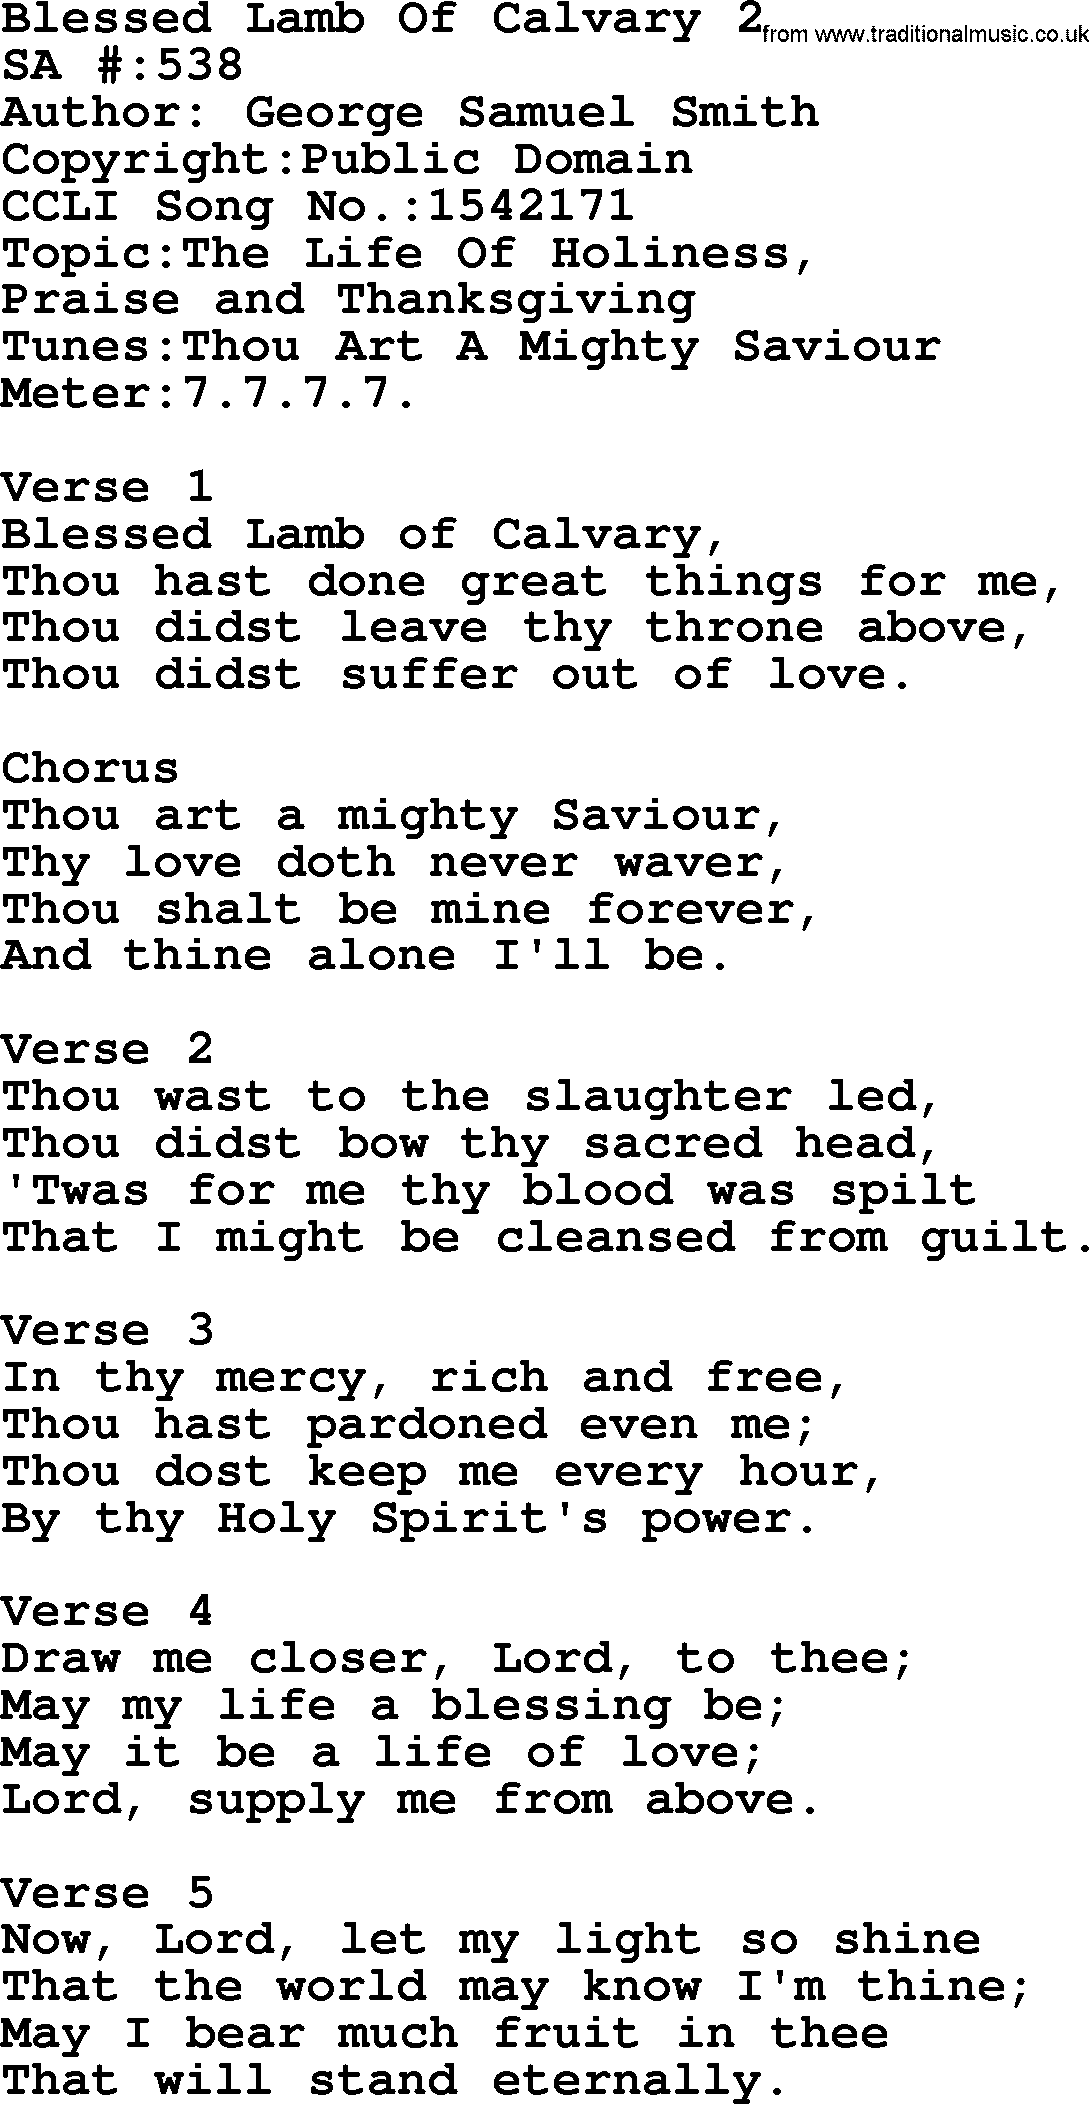 Salvation Army Hymnal, title: Blessed Lamb Of Calvary 2, with lyrics and PDF,